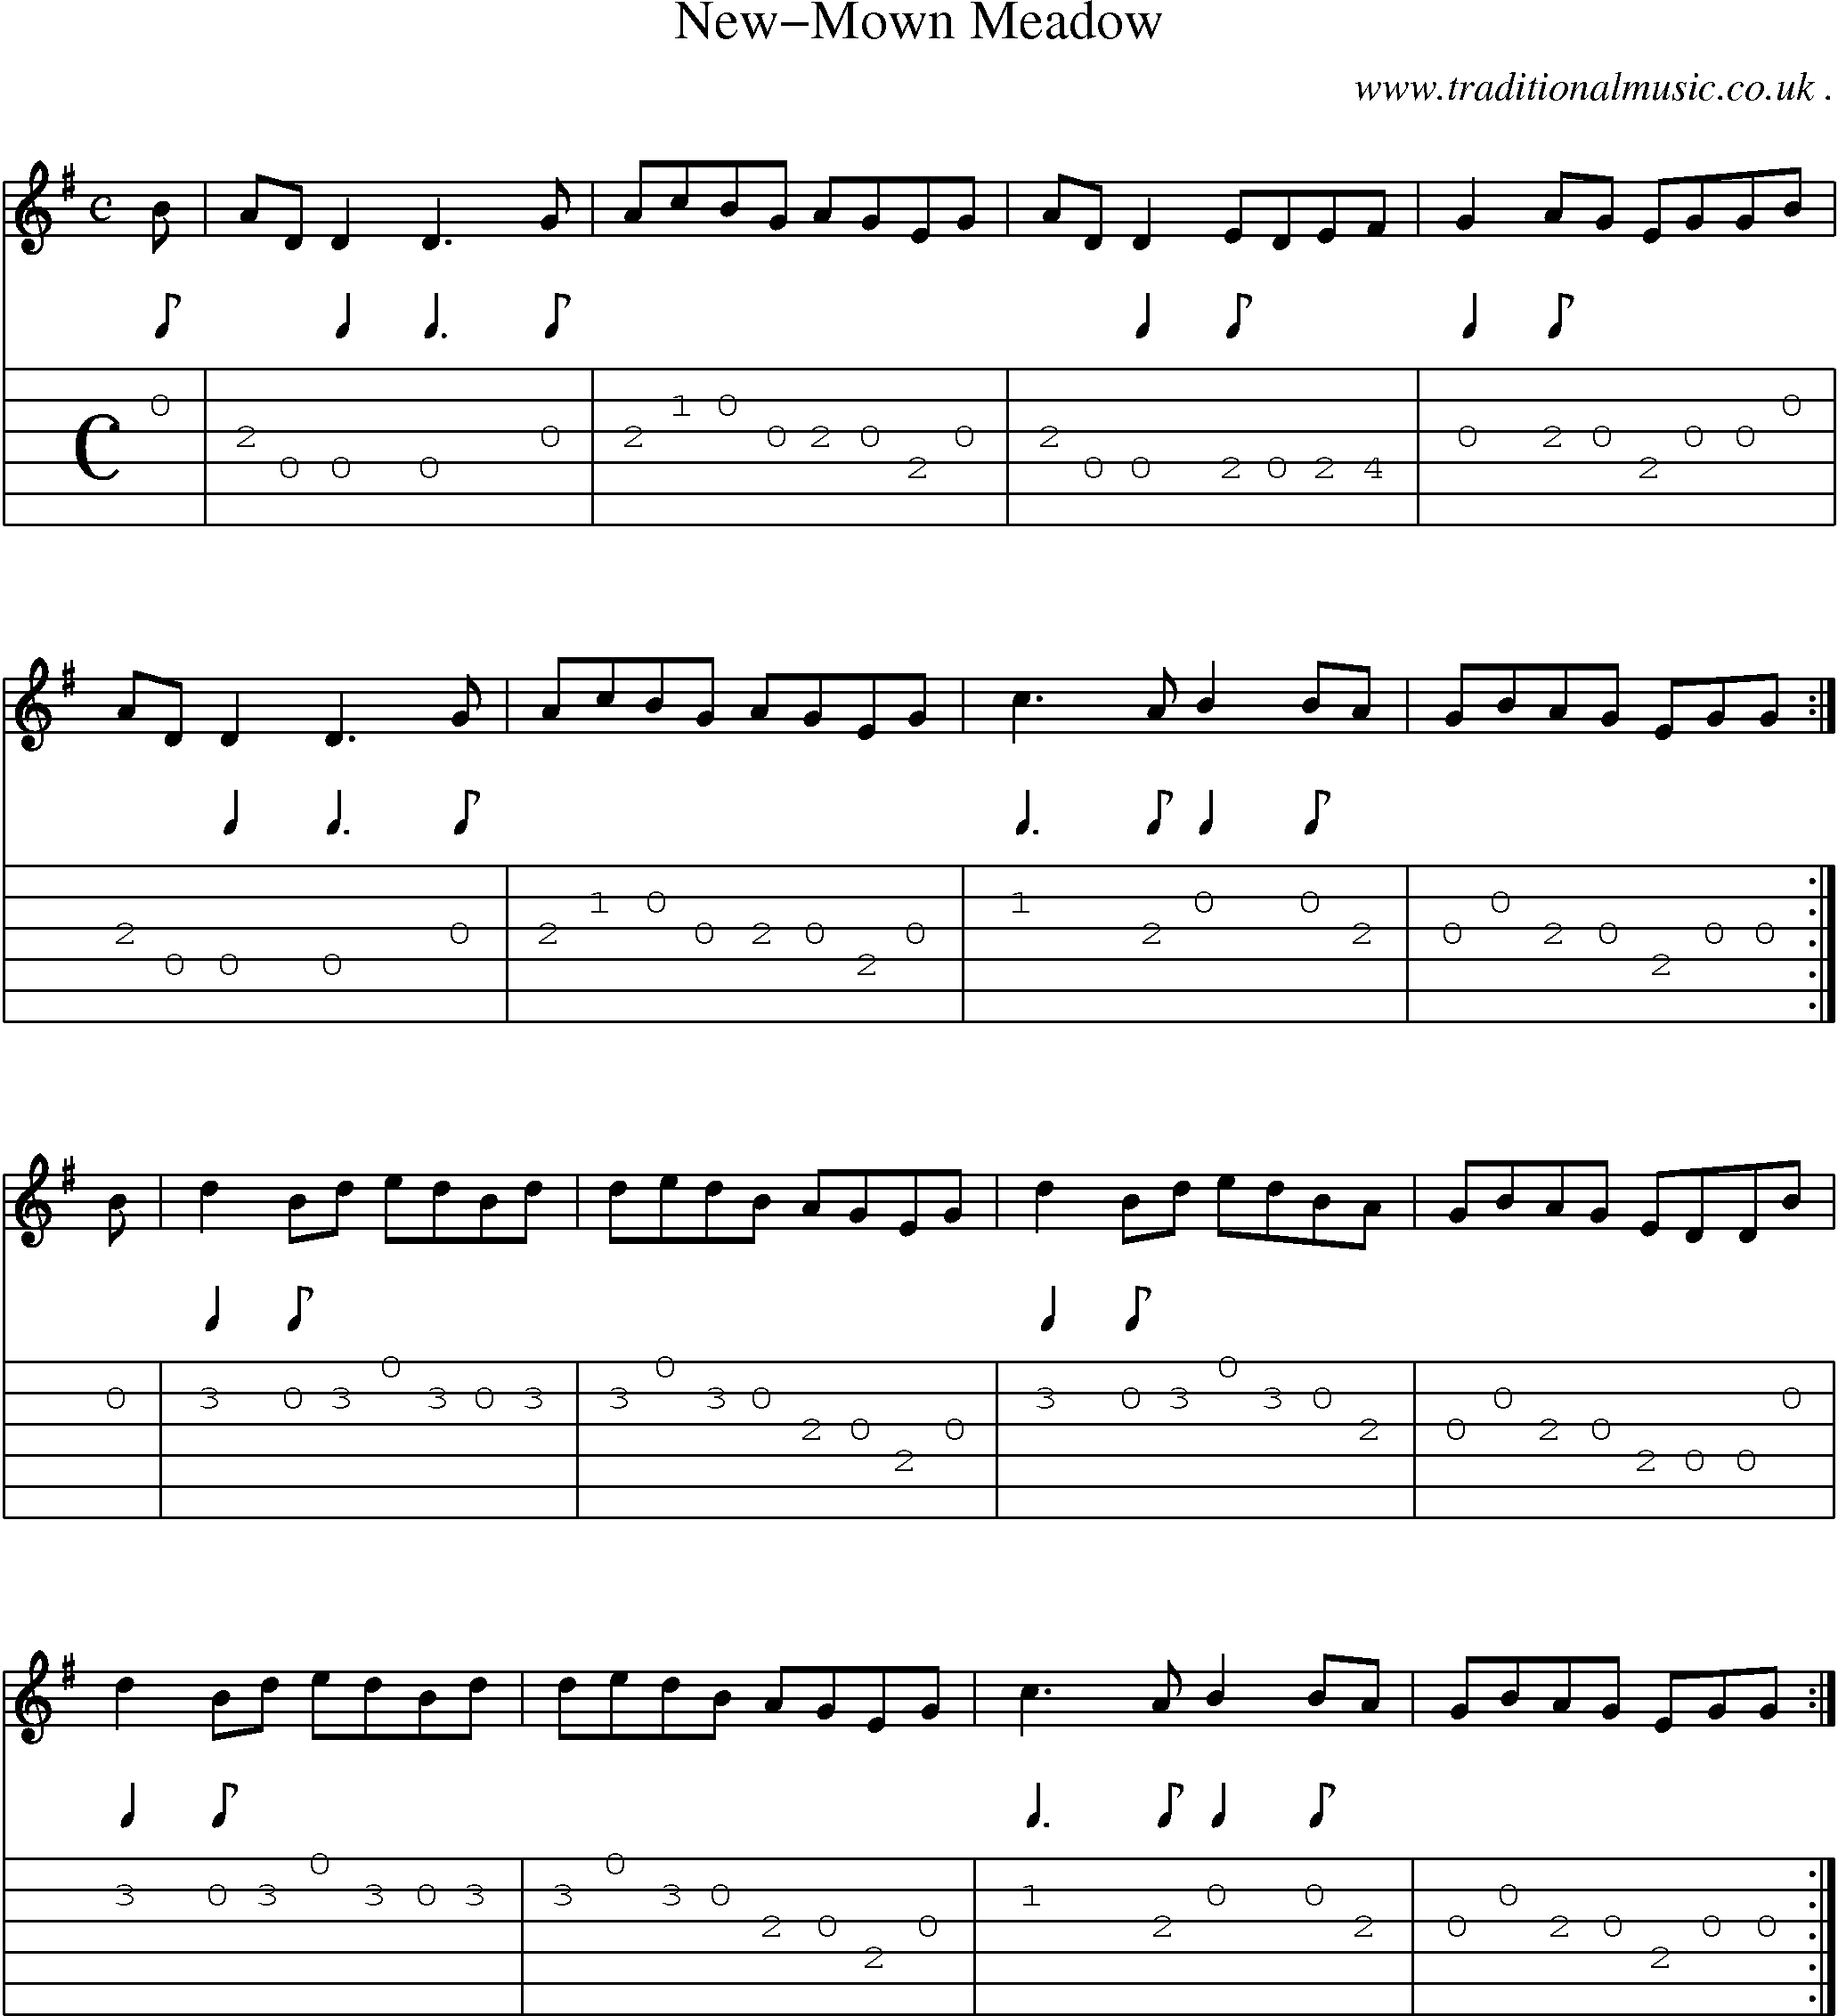 Sheet-Music and Guitar Tabs for New-mown Meadow